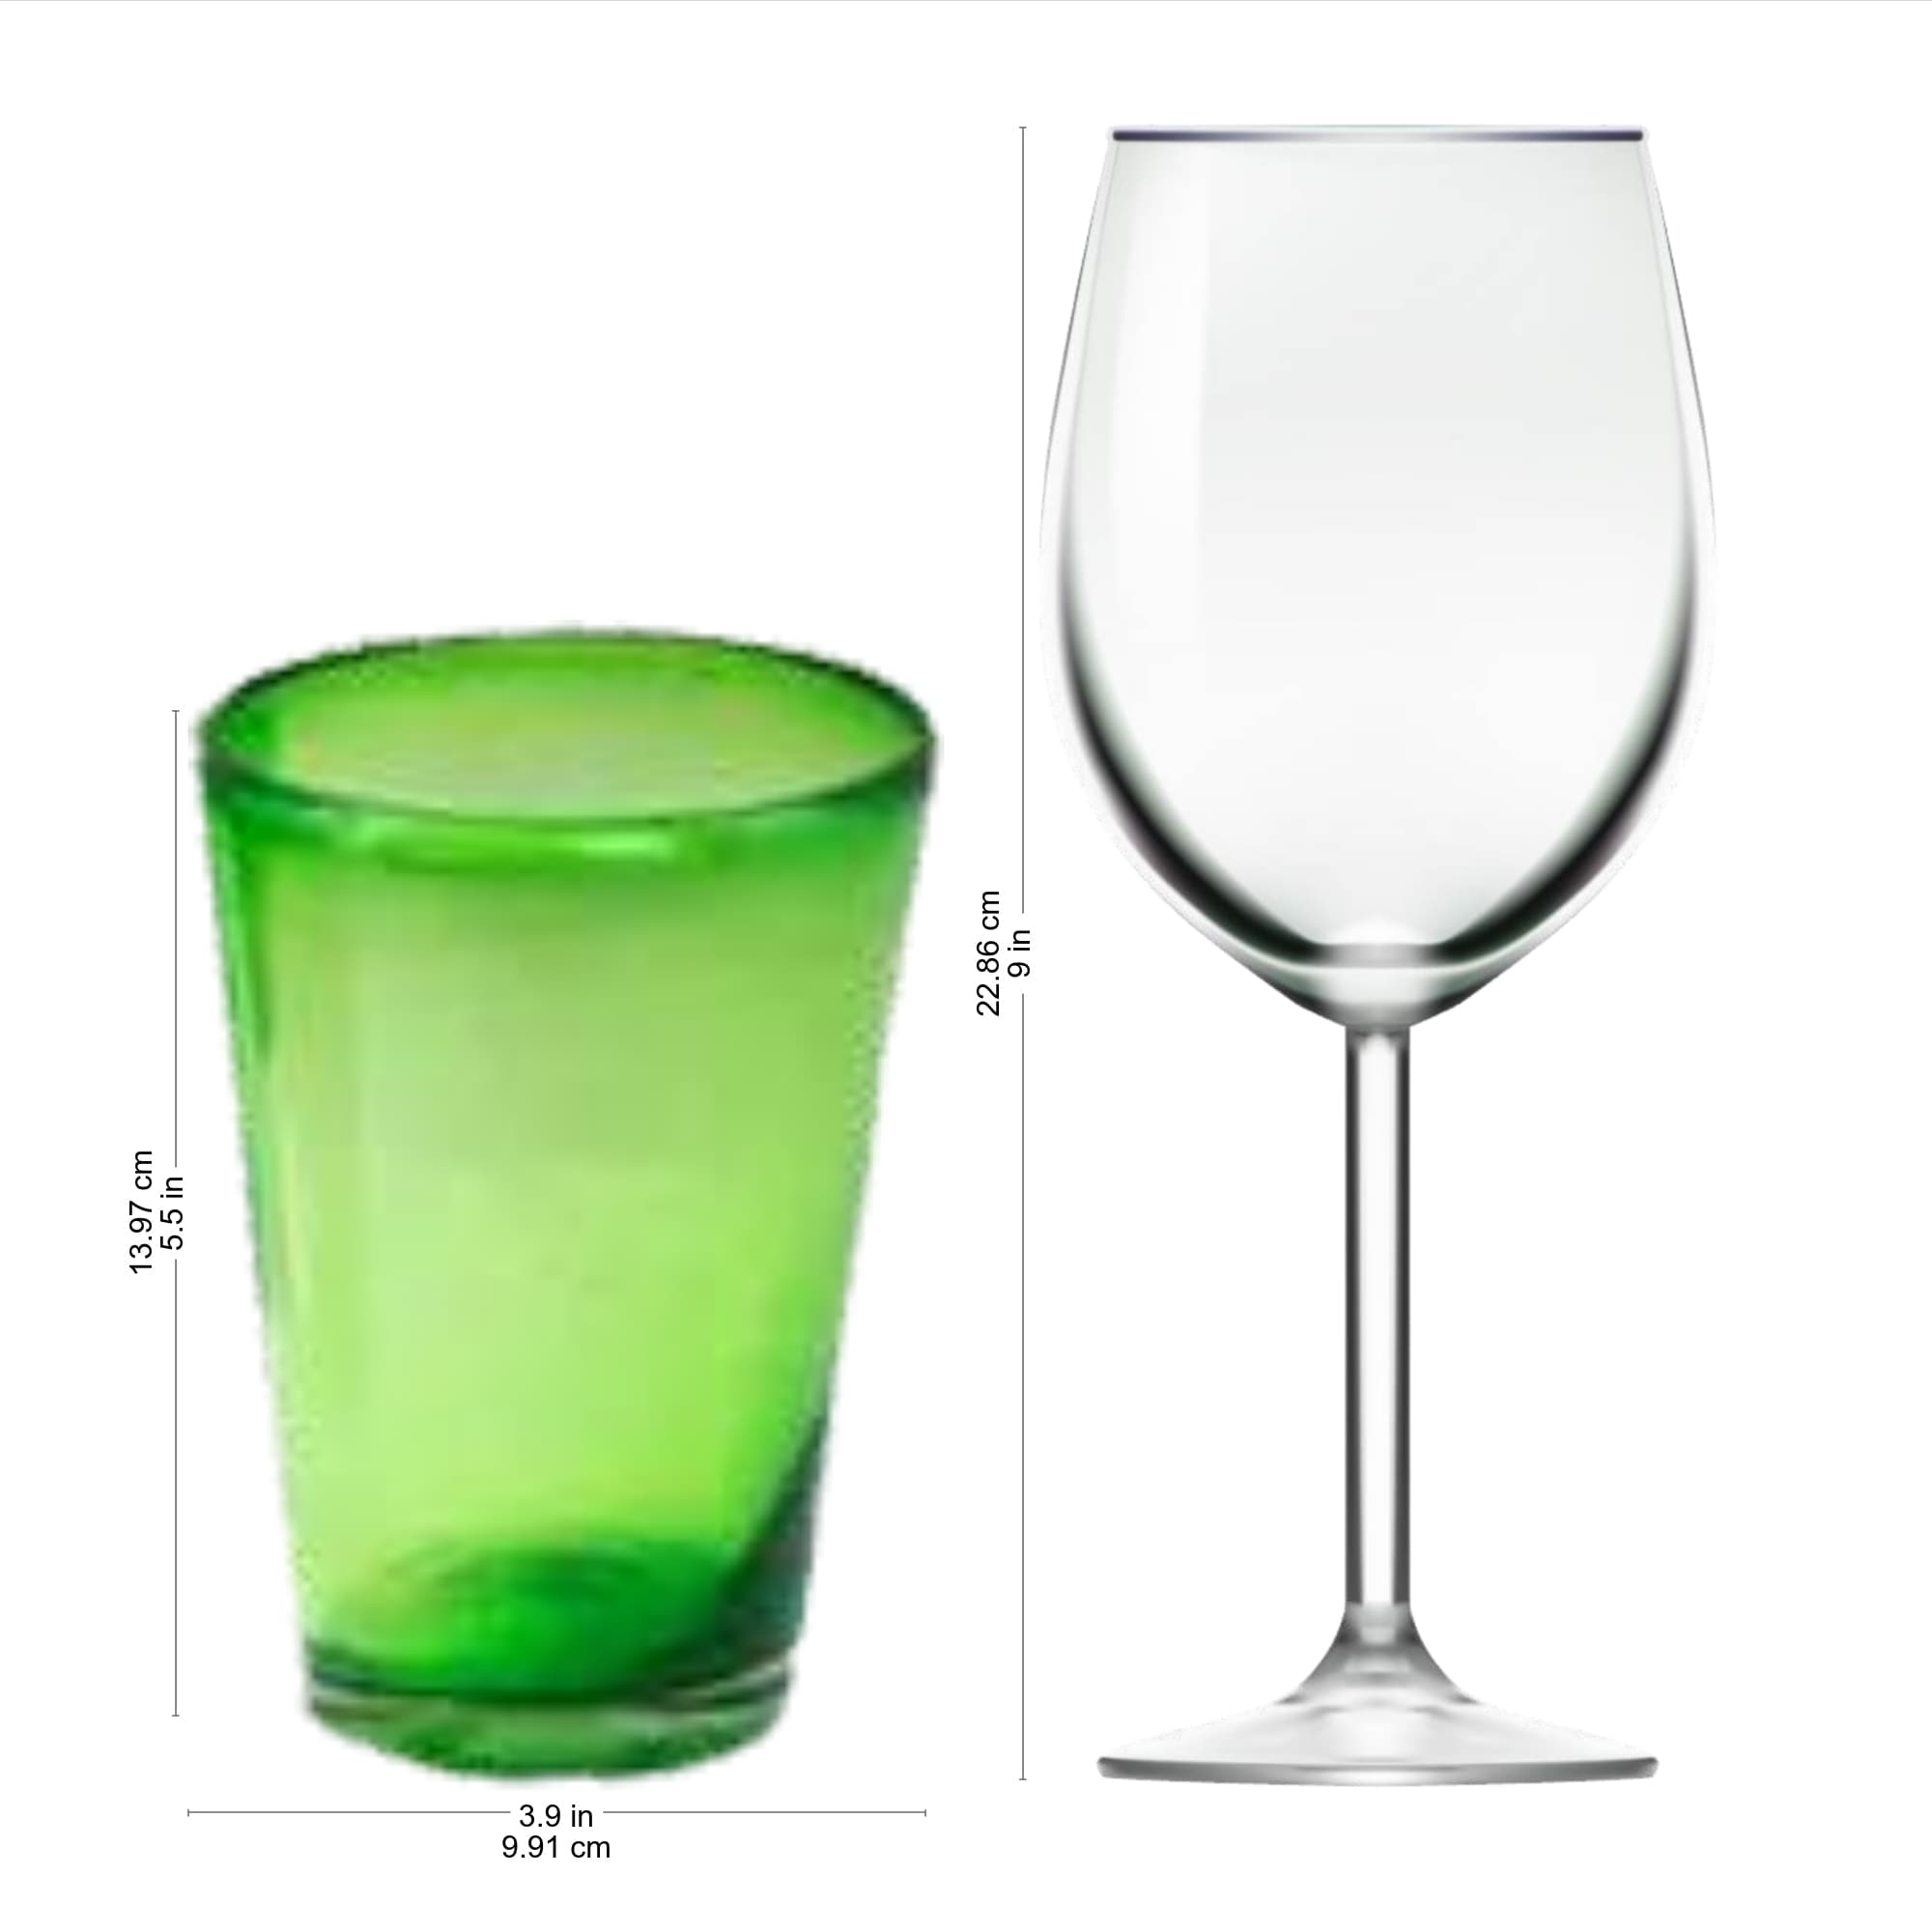 https://ak1.ostkcdn.com/images/products/is/images/direct/10aa98ec38140b5e32d54581e5c3956111a42898/Handmade-Glass-Emerald-Angles-Drinking-Glasses-Set-of-6-%28Mexico%29.jpg